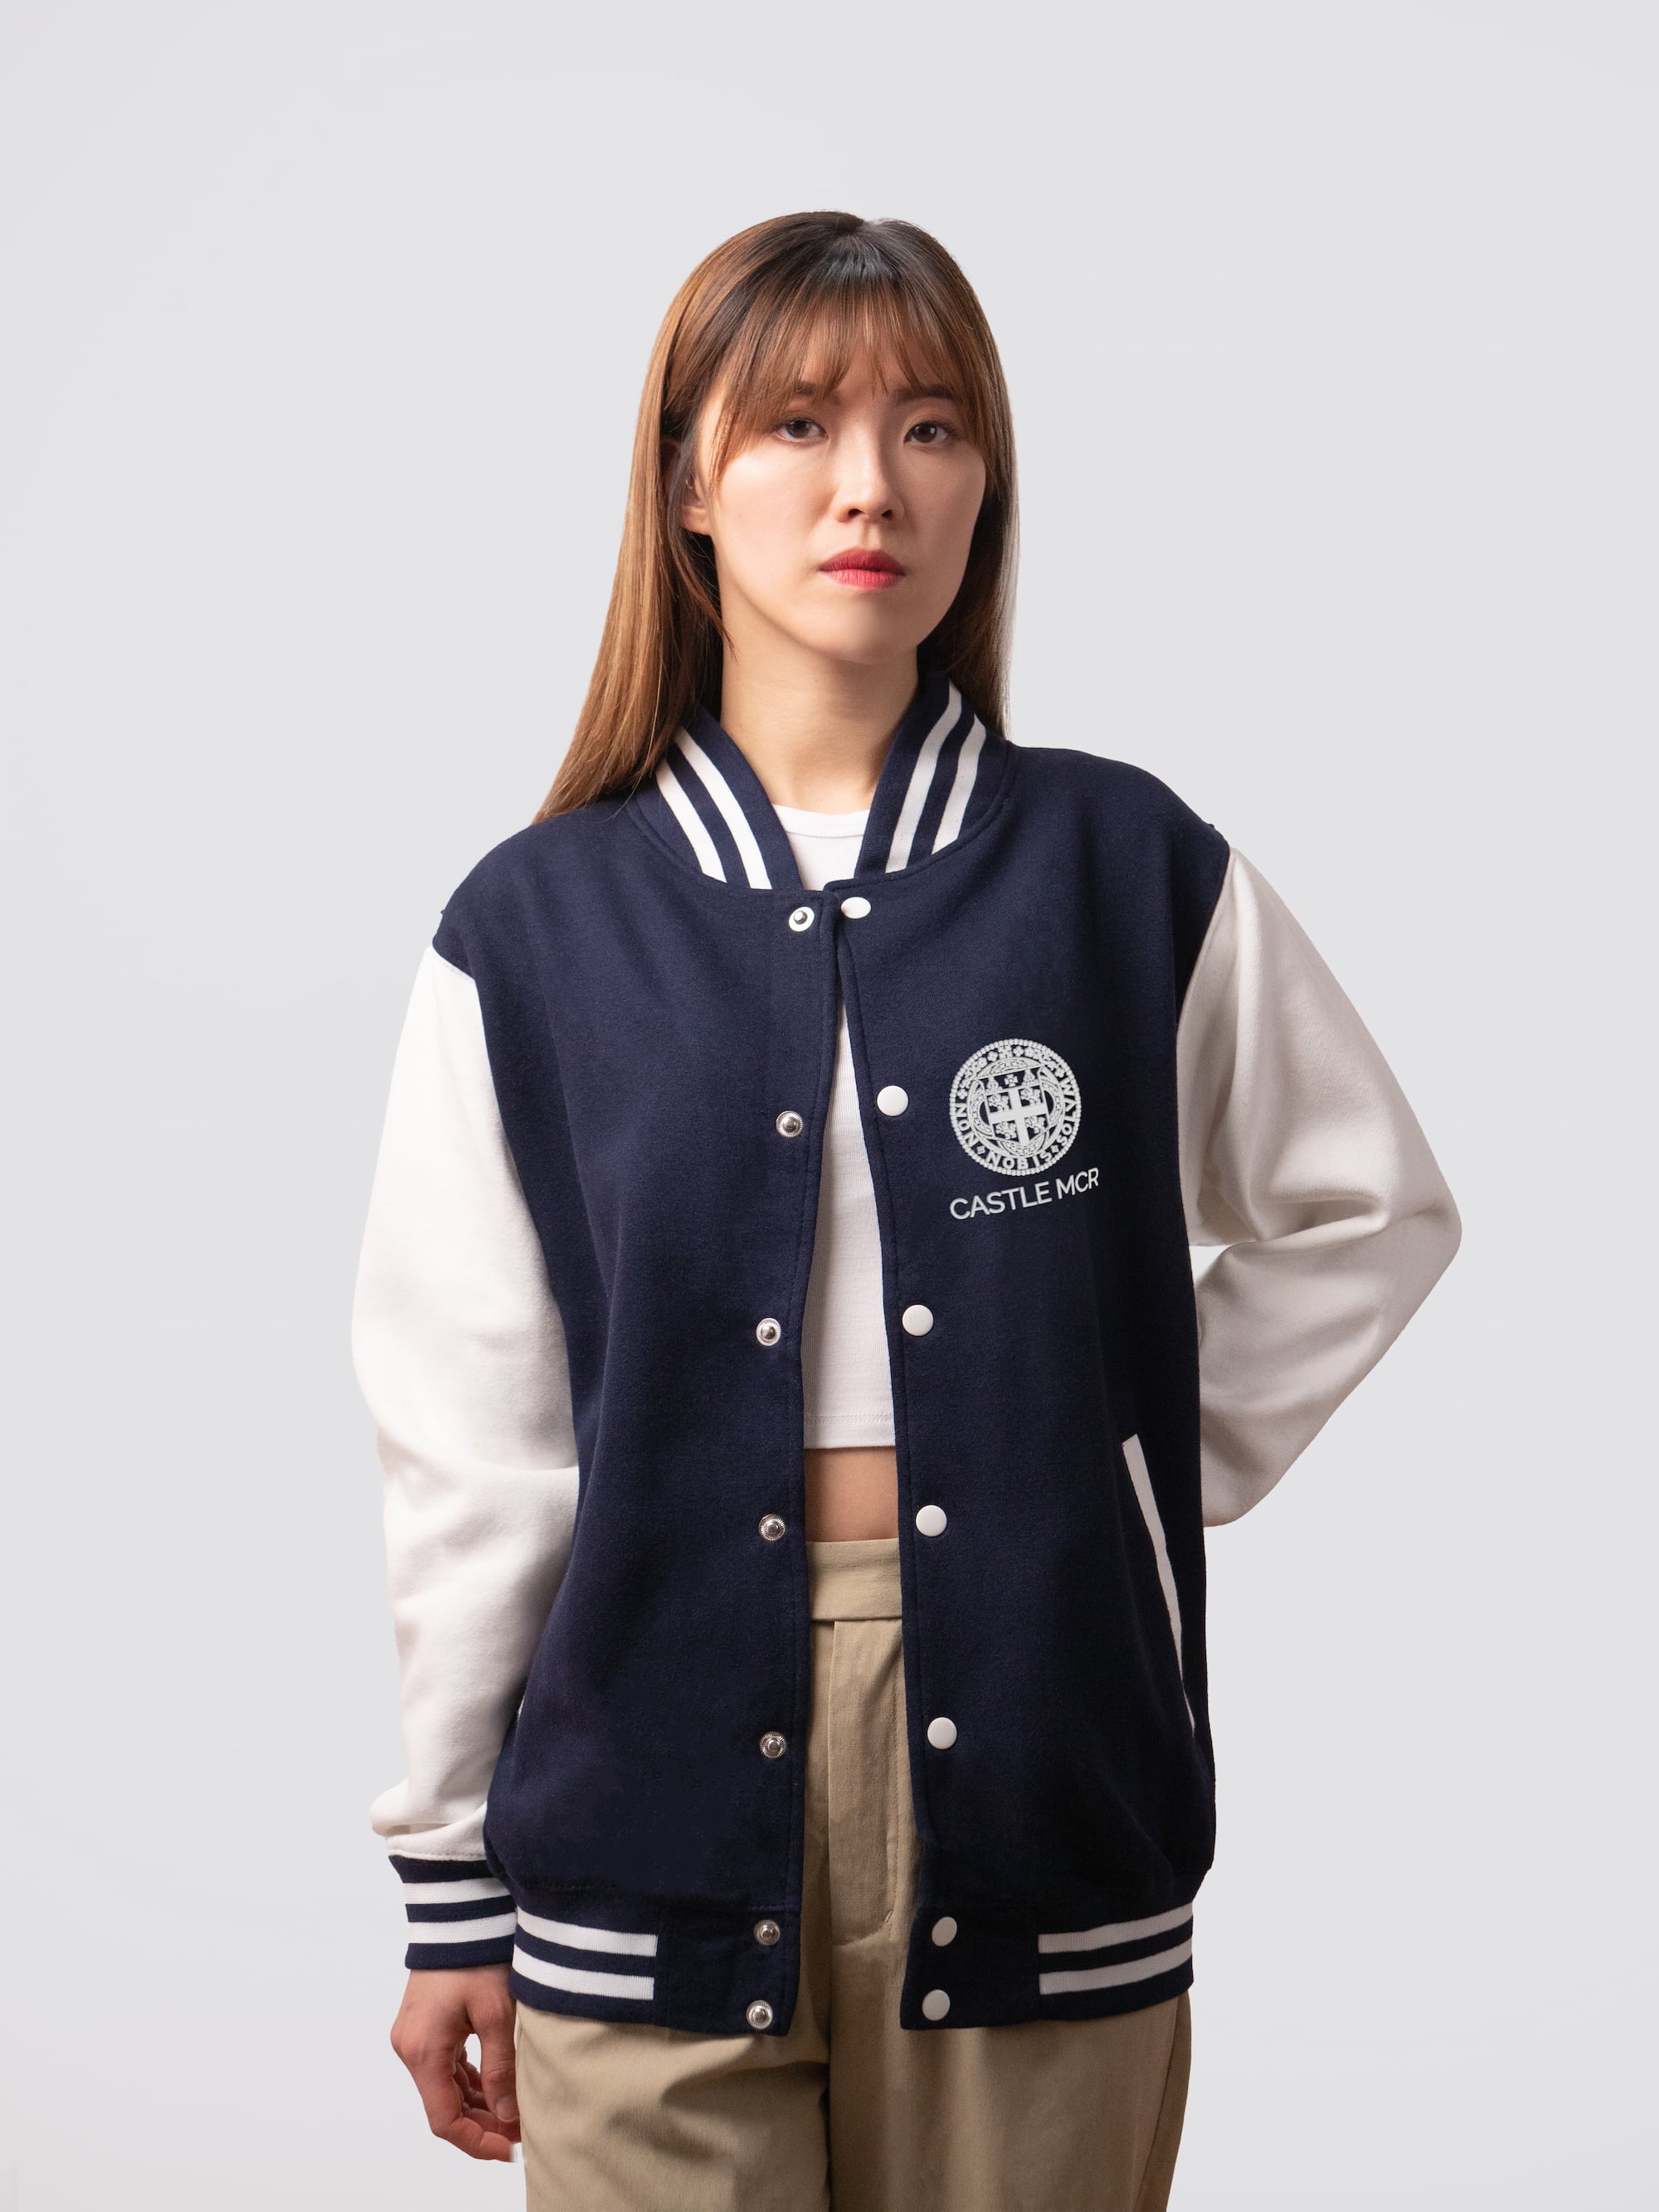 Retro style varsity jacket, with embroidered Castle MCR crest